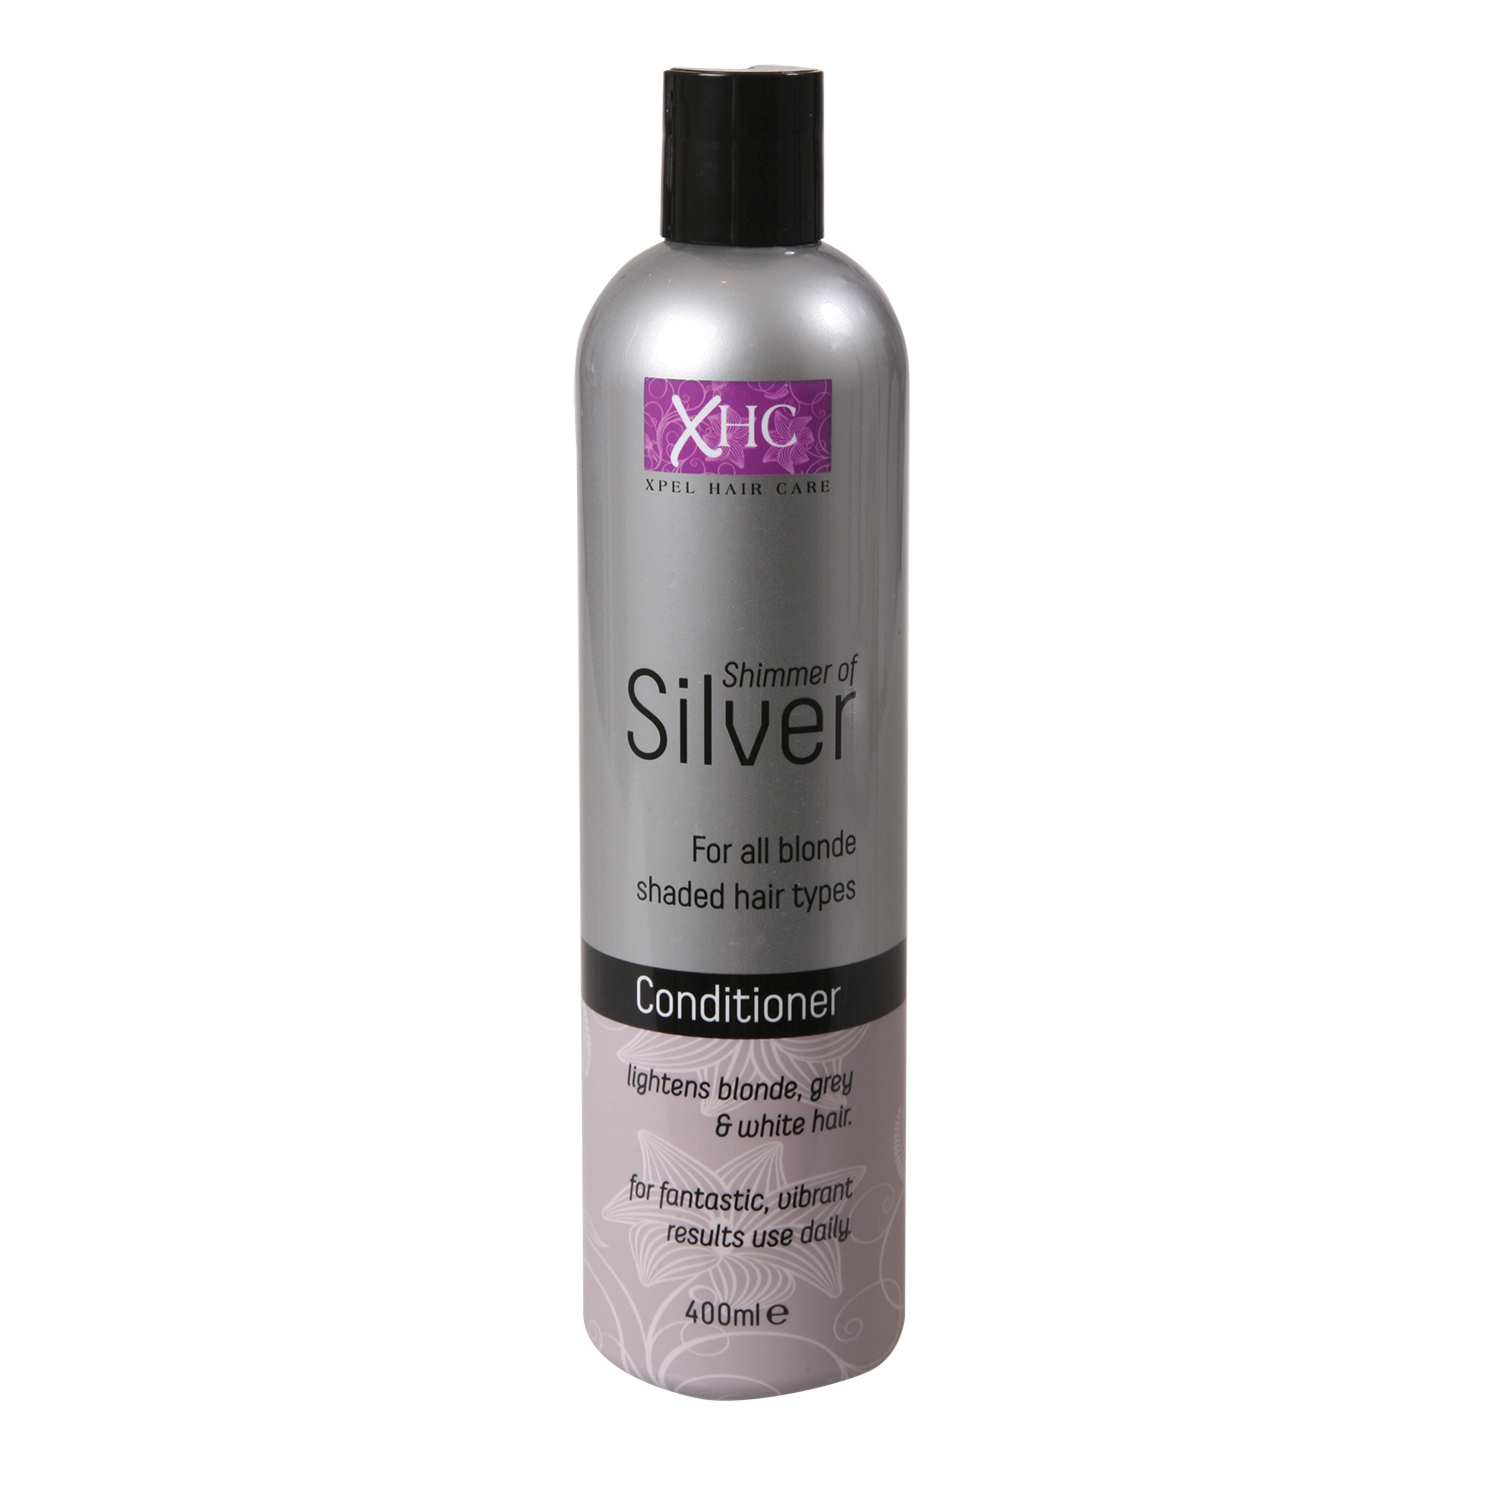 XHC Shimmer of Silver Conditioner Image